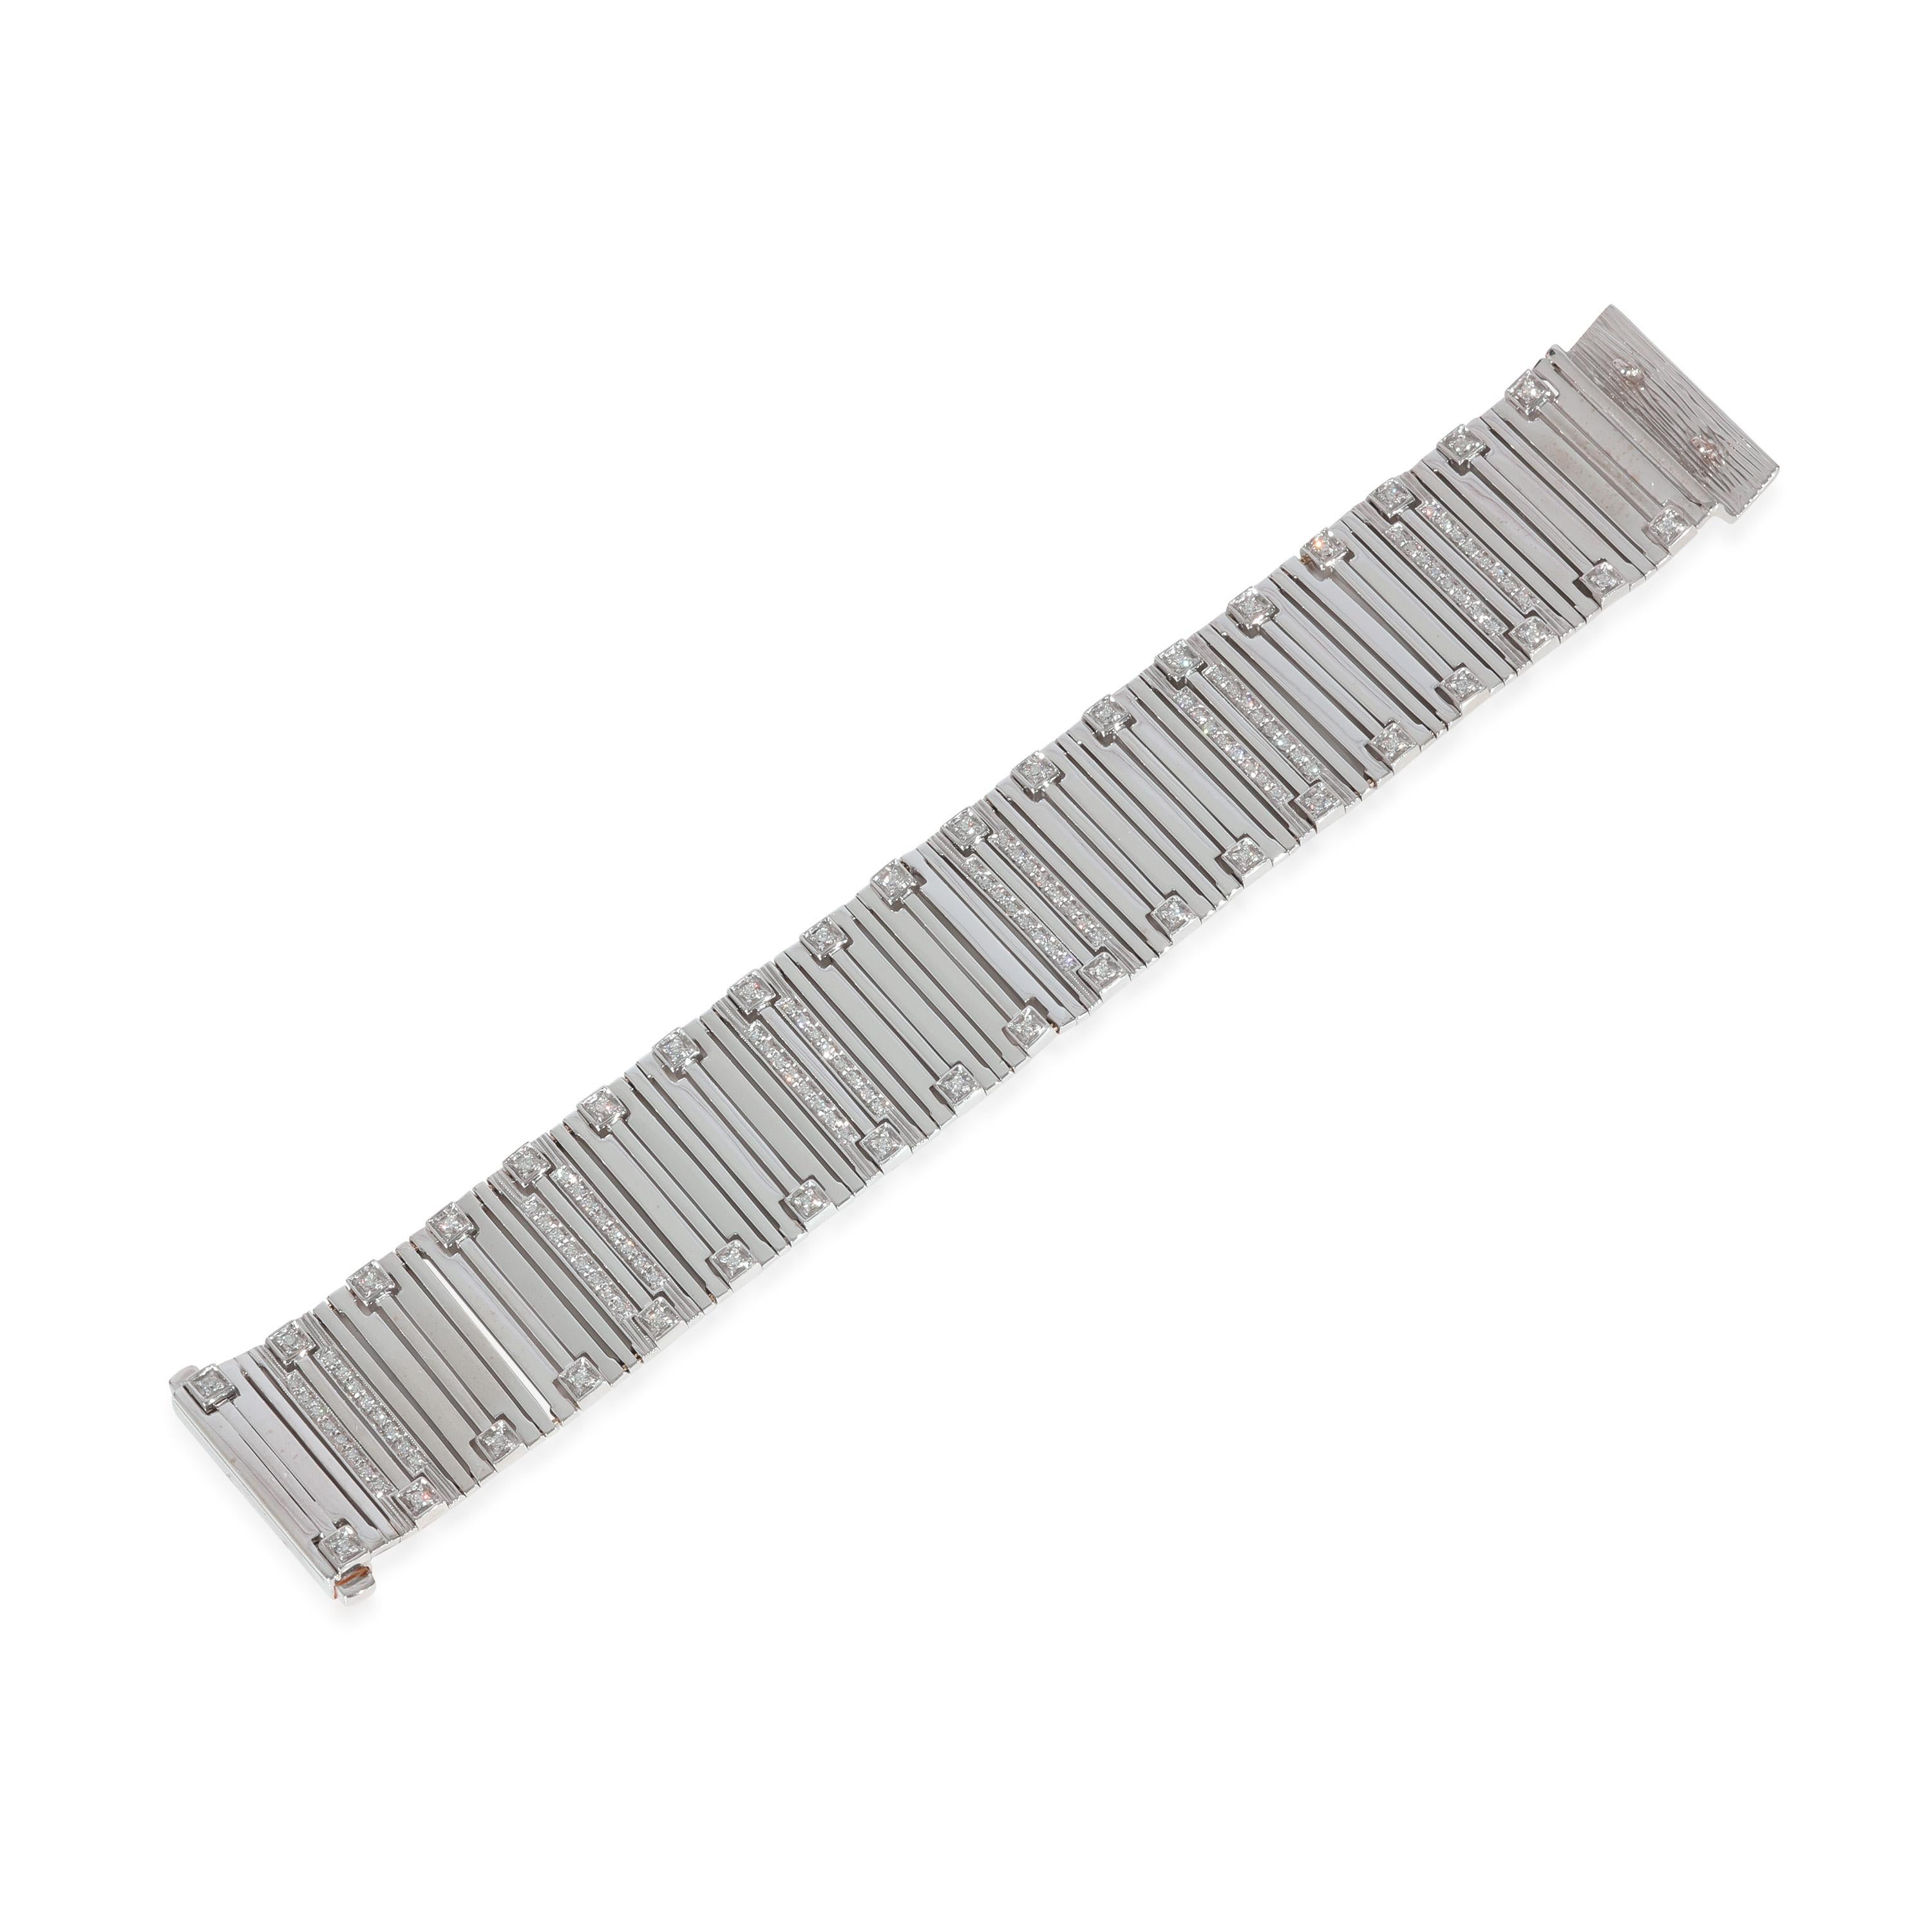 Roberto Coin Diamond Bracelet in 18k White Gold 1 CTW

PRIMARY DETAILS
SKU: 125936
Listing Title: Roberto Coin Diamond Bracelet in 18k White Gold 1 CTW
Condition Description: Retails for 13000 USD. In excellent condition and recently polished. 7